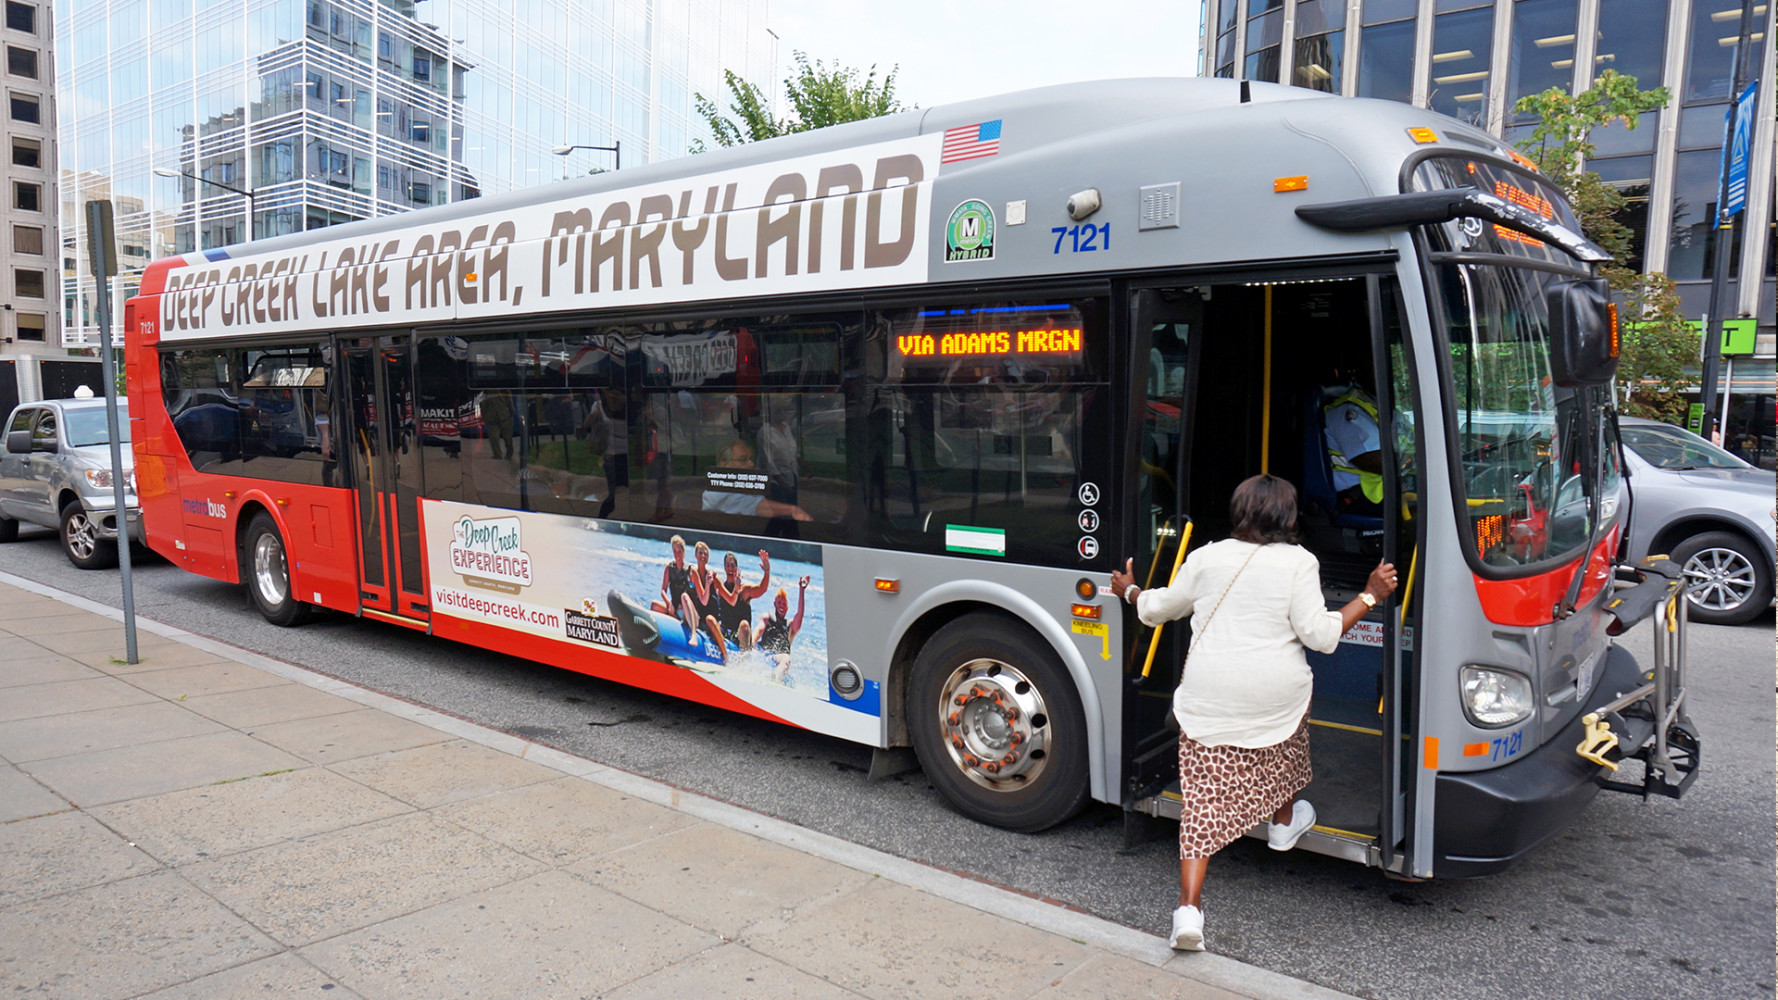 A woman boards the Metrobus in downtown Washington, D.C. (Image credit: Getty Images)